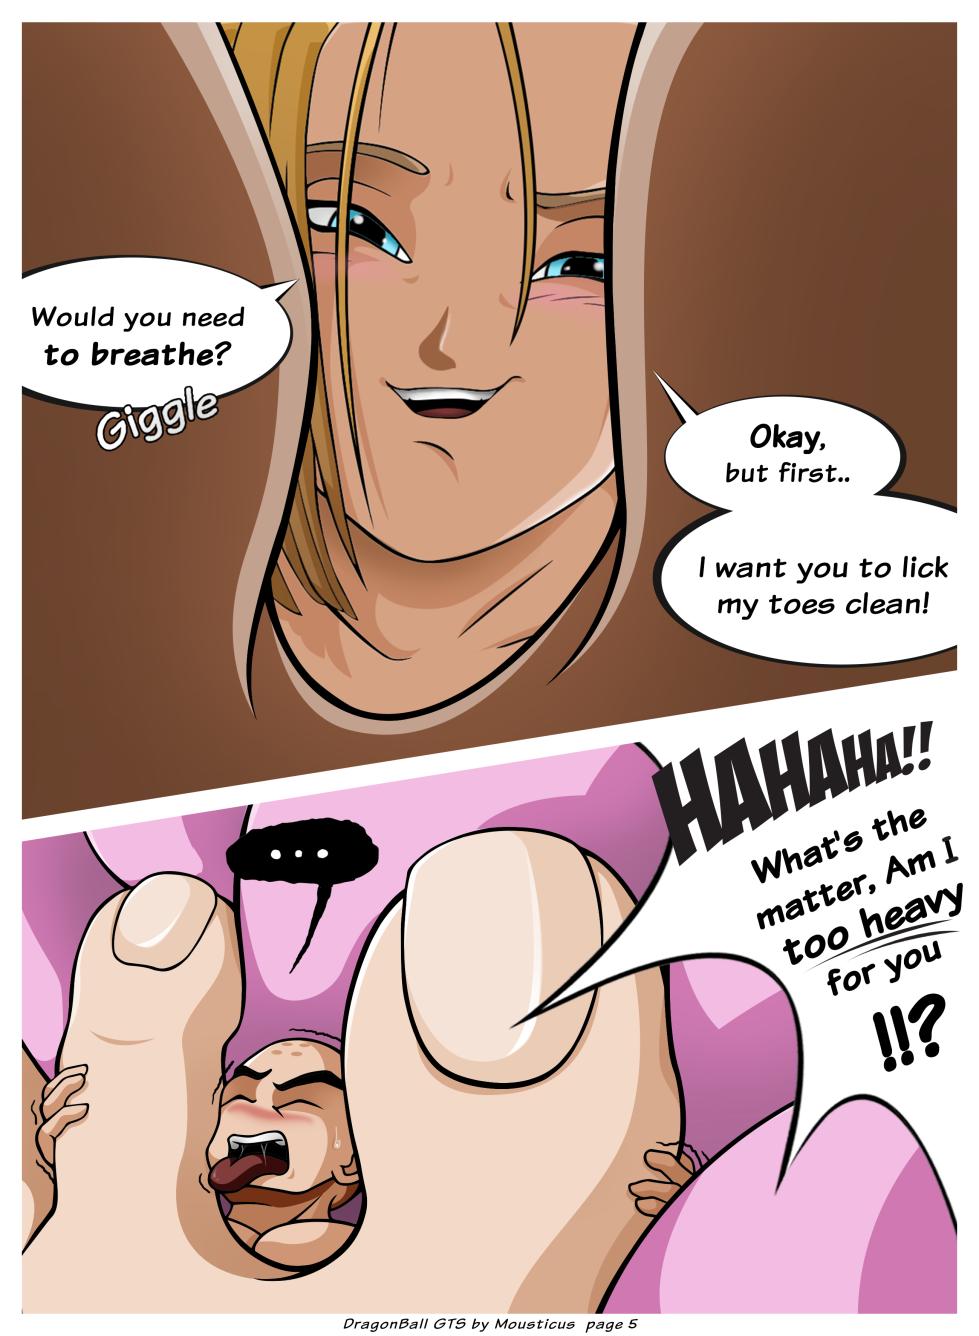 [Mousticus] DragonBall Giantess - Page 6